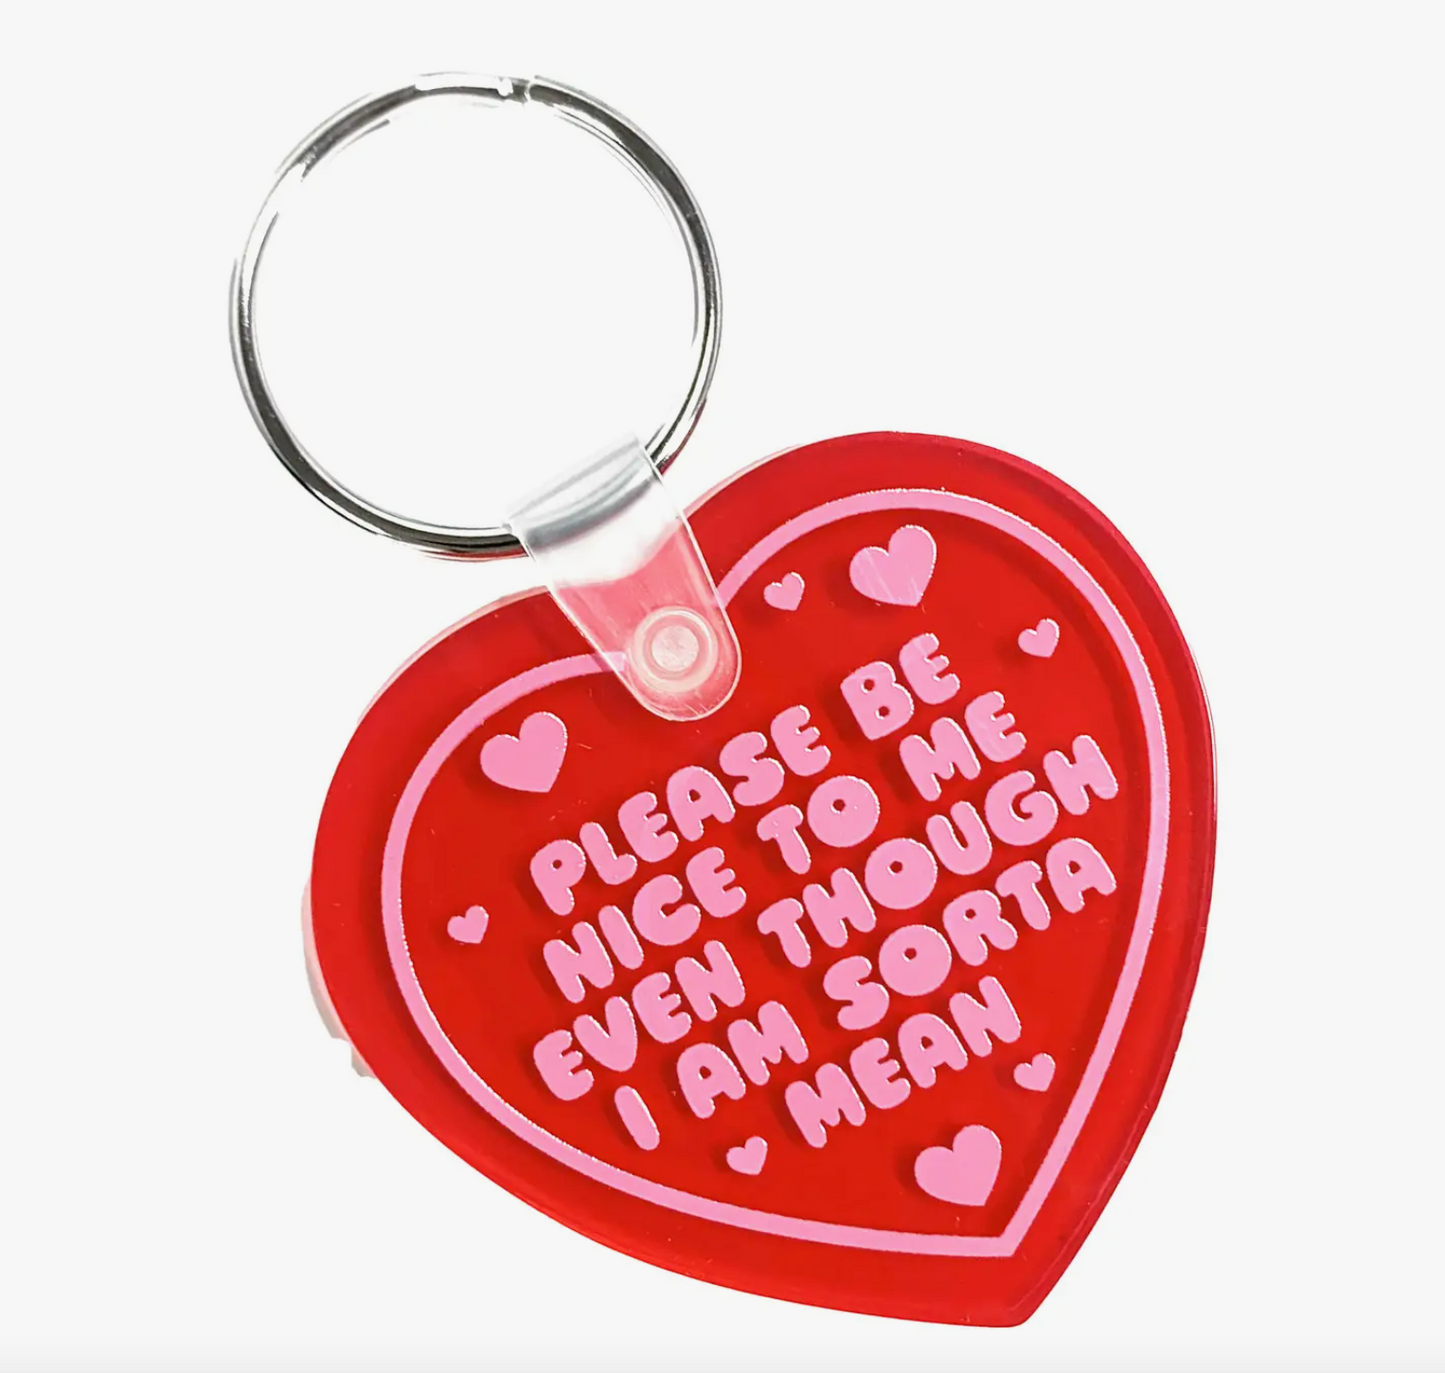 Please Be Nice To Me Even Though I Am Sorta Mean Vinyl Keychain